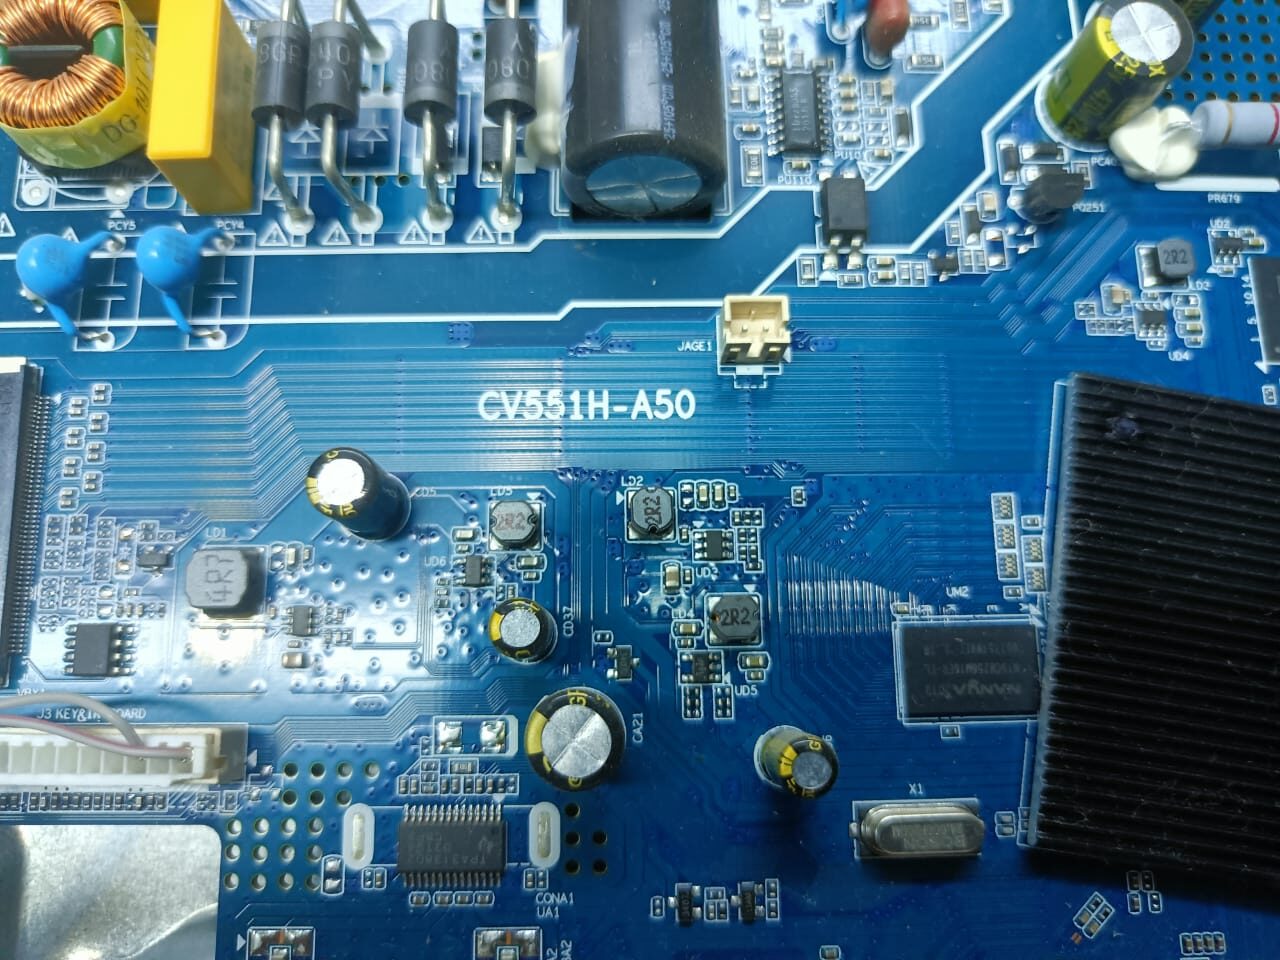 50USF20 Chassis Main Board CV551H-A50 Software Firmware